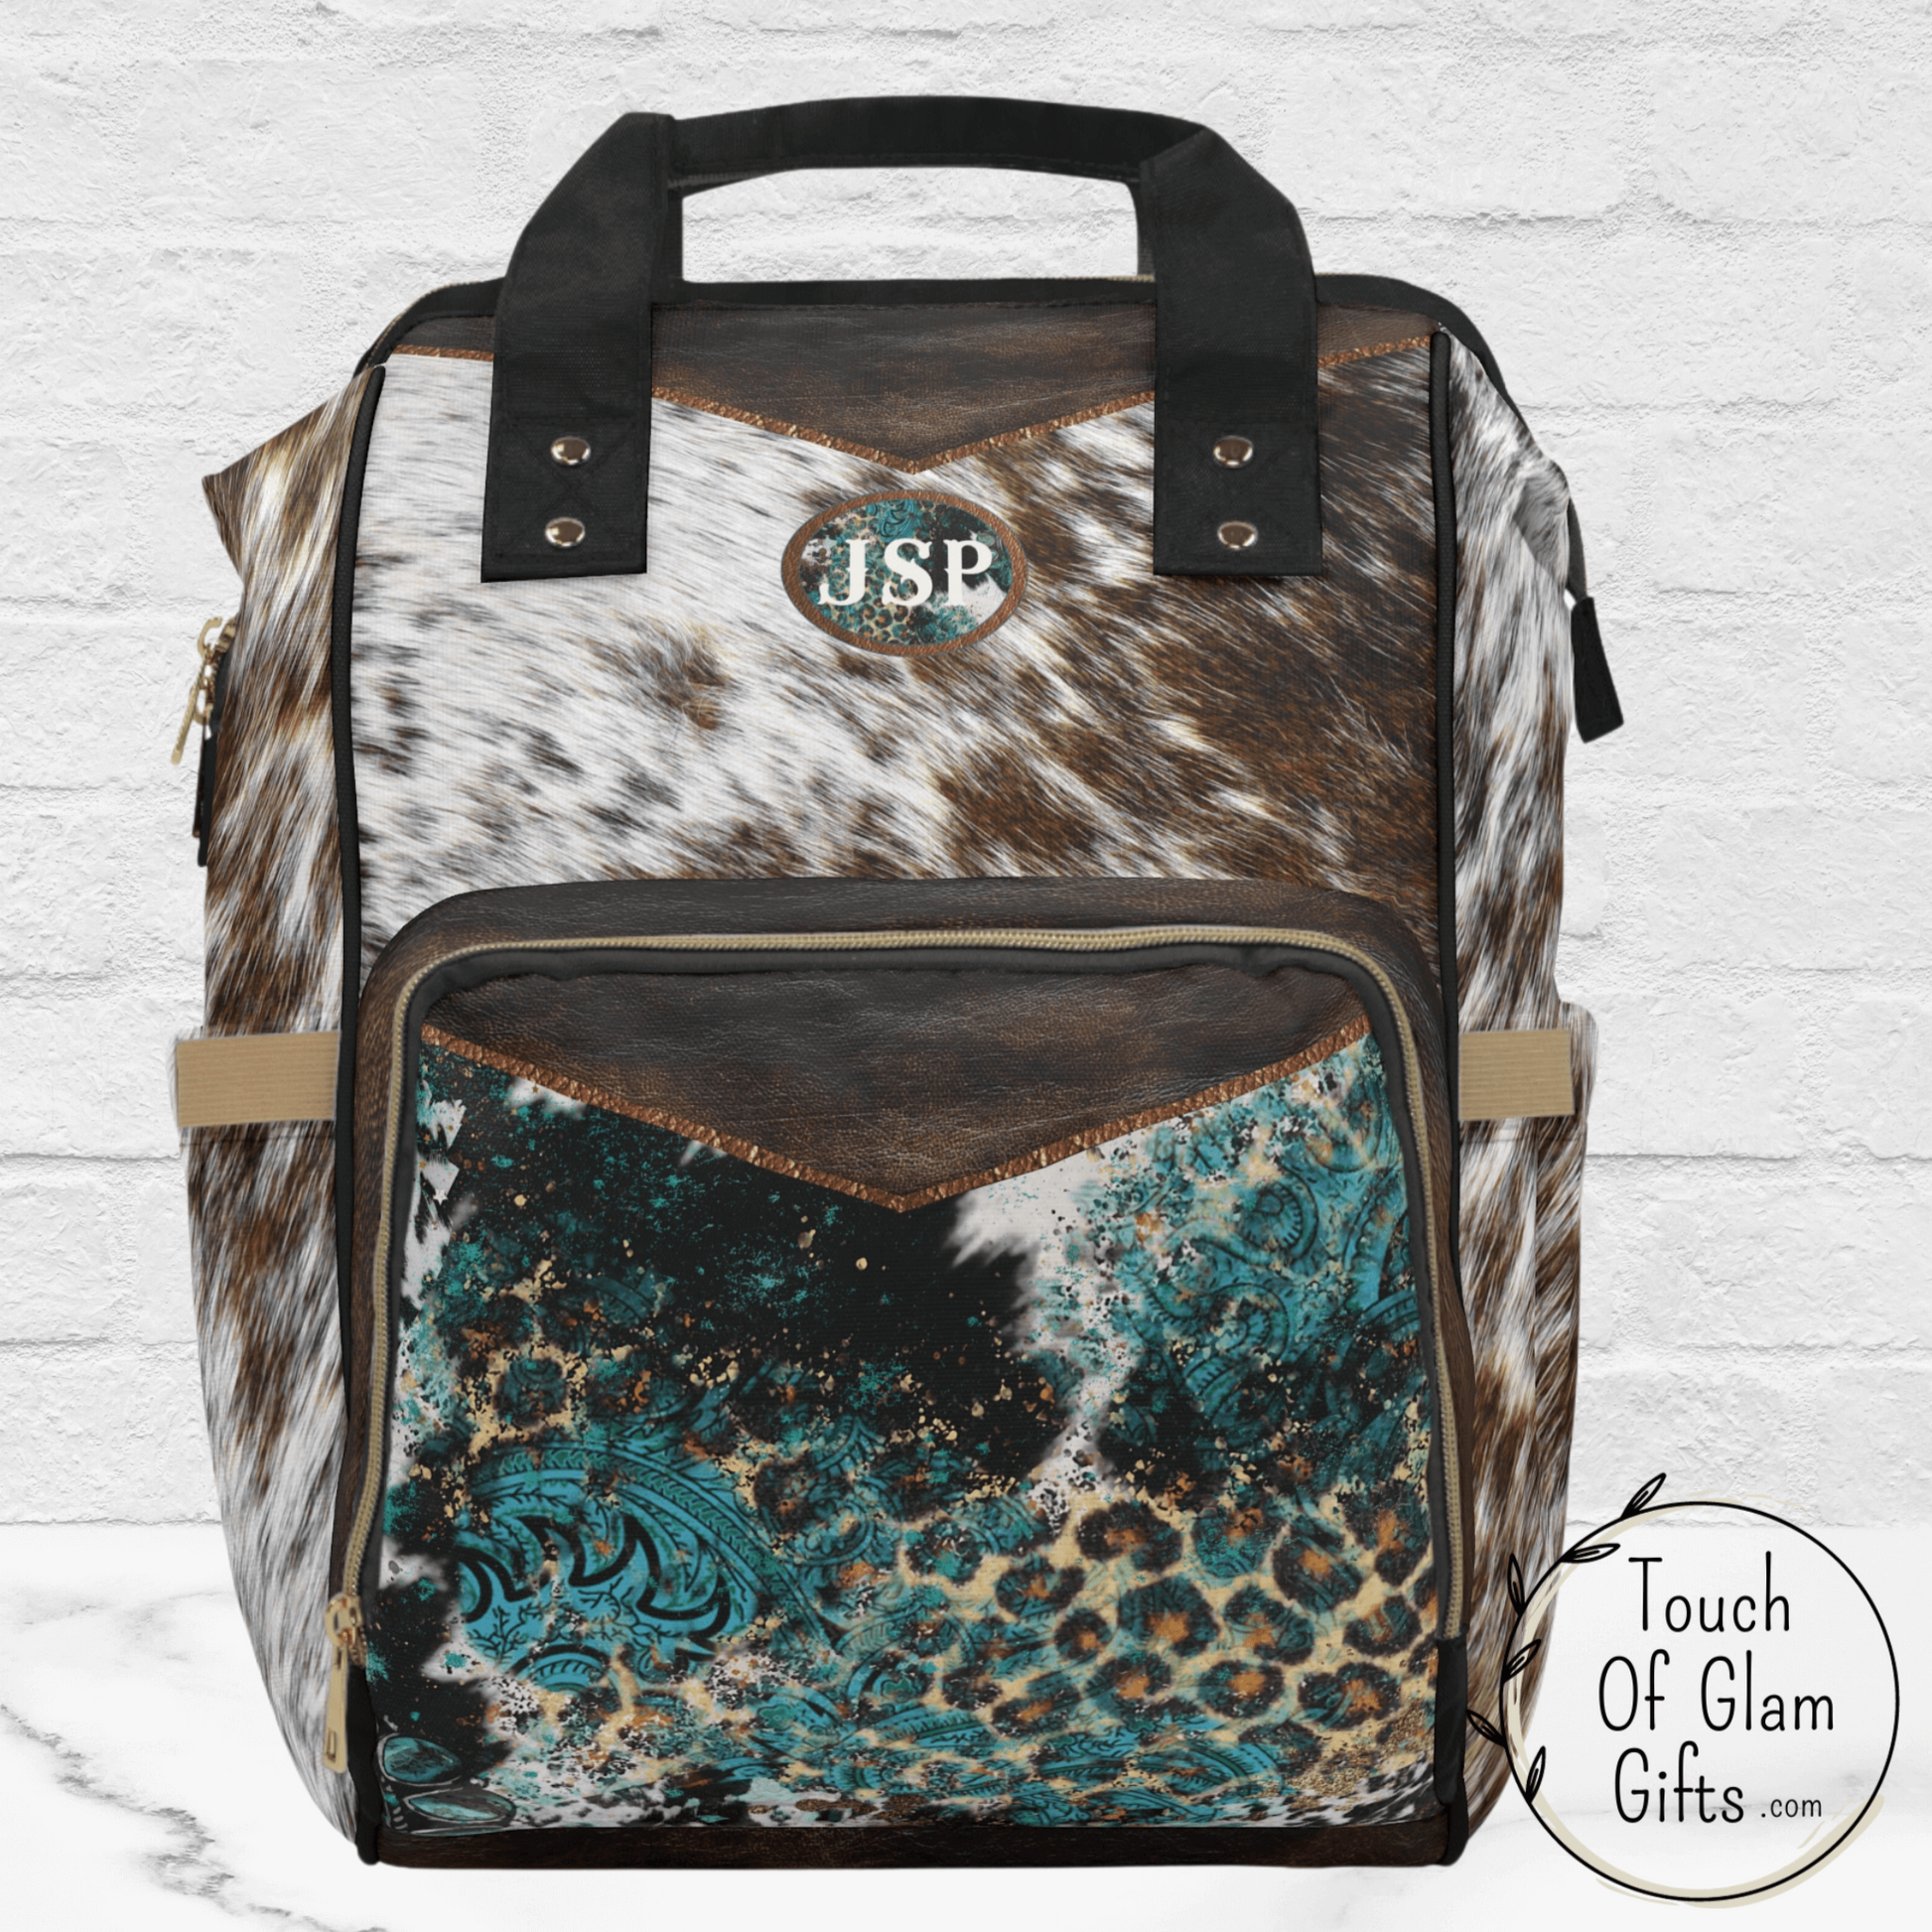 Our custom made diaper bag backpack with brown cowhide print shows the monogrammed initials on the front with a turquoise patch. This diaper bag makes the perfect, unique baby shower gift for new parents that want a bag that lasts.